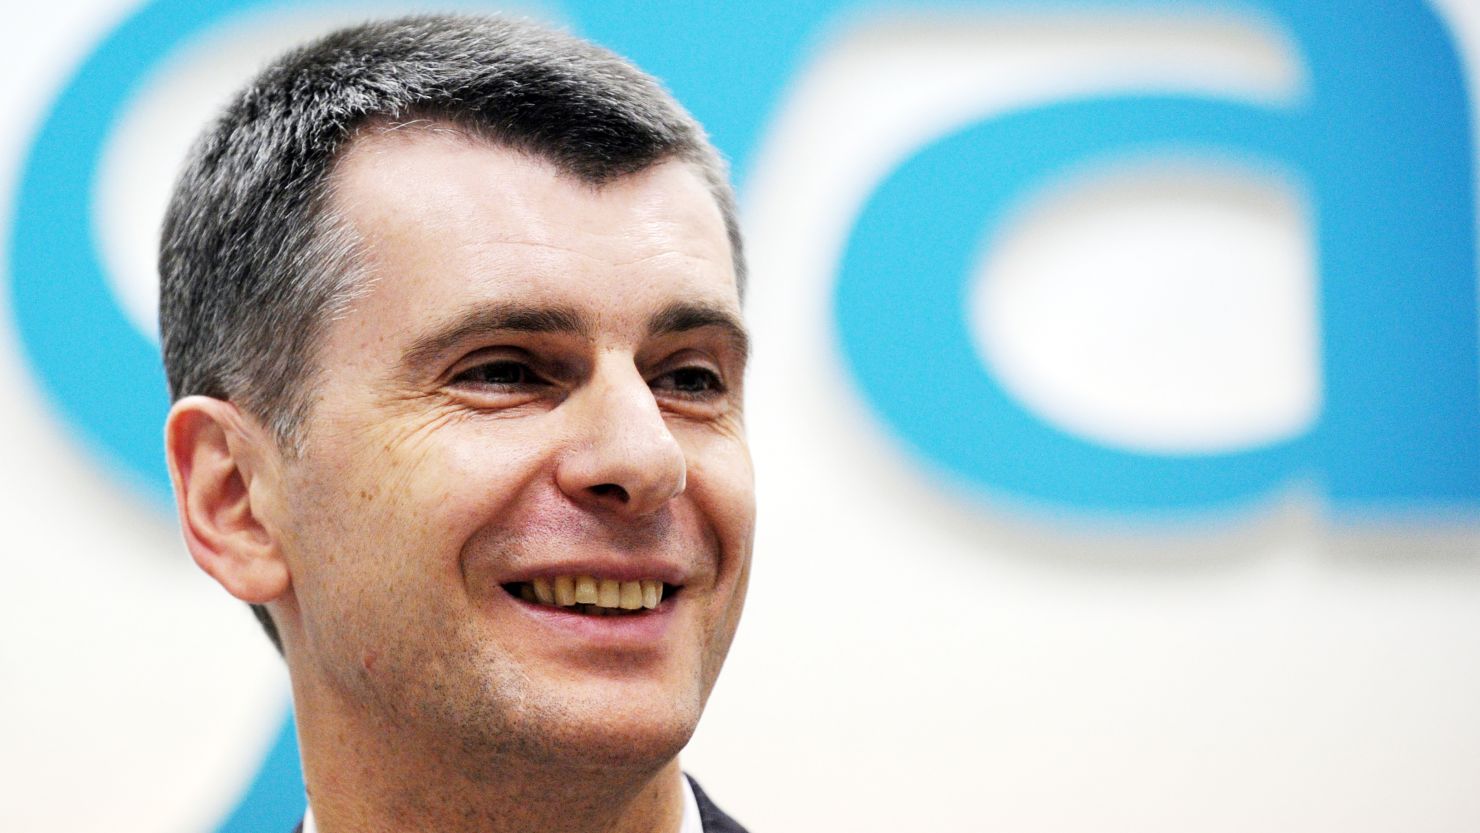 Mikhail Prokhorov became an NBA team owner in 2010 when he bought the Nets.